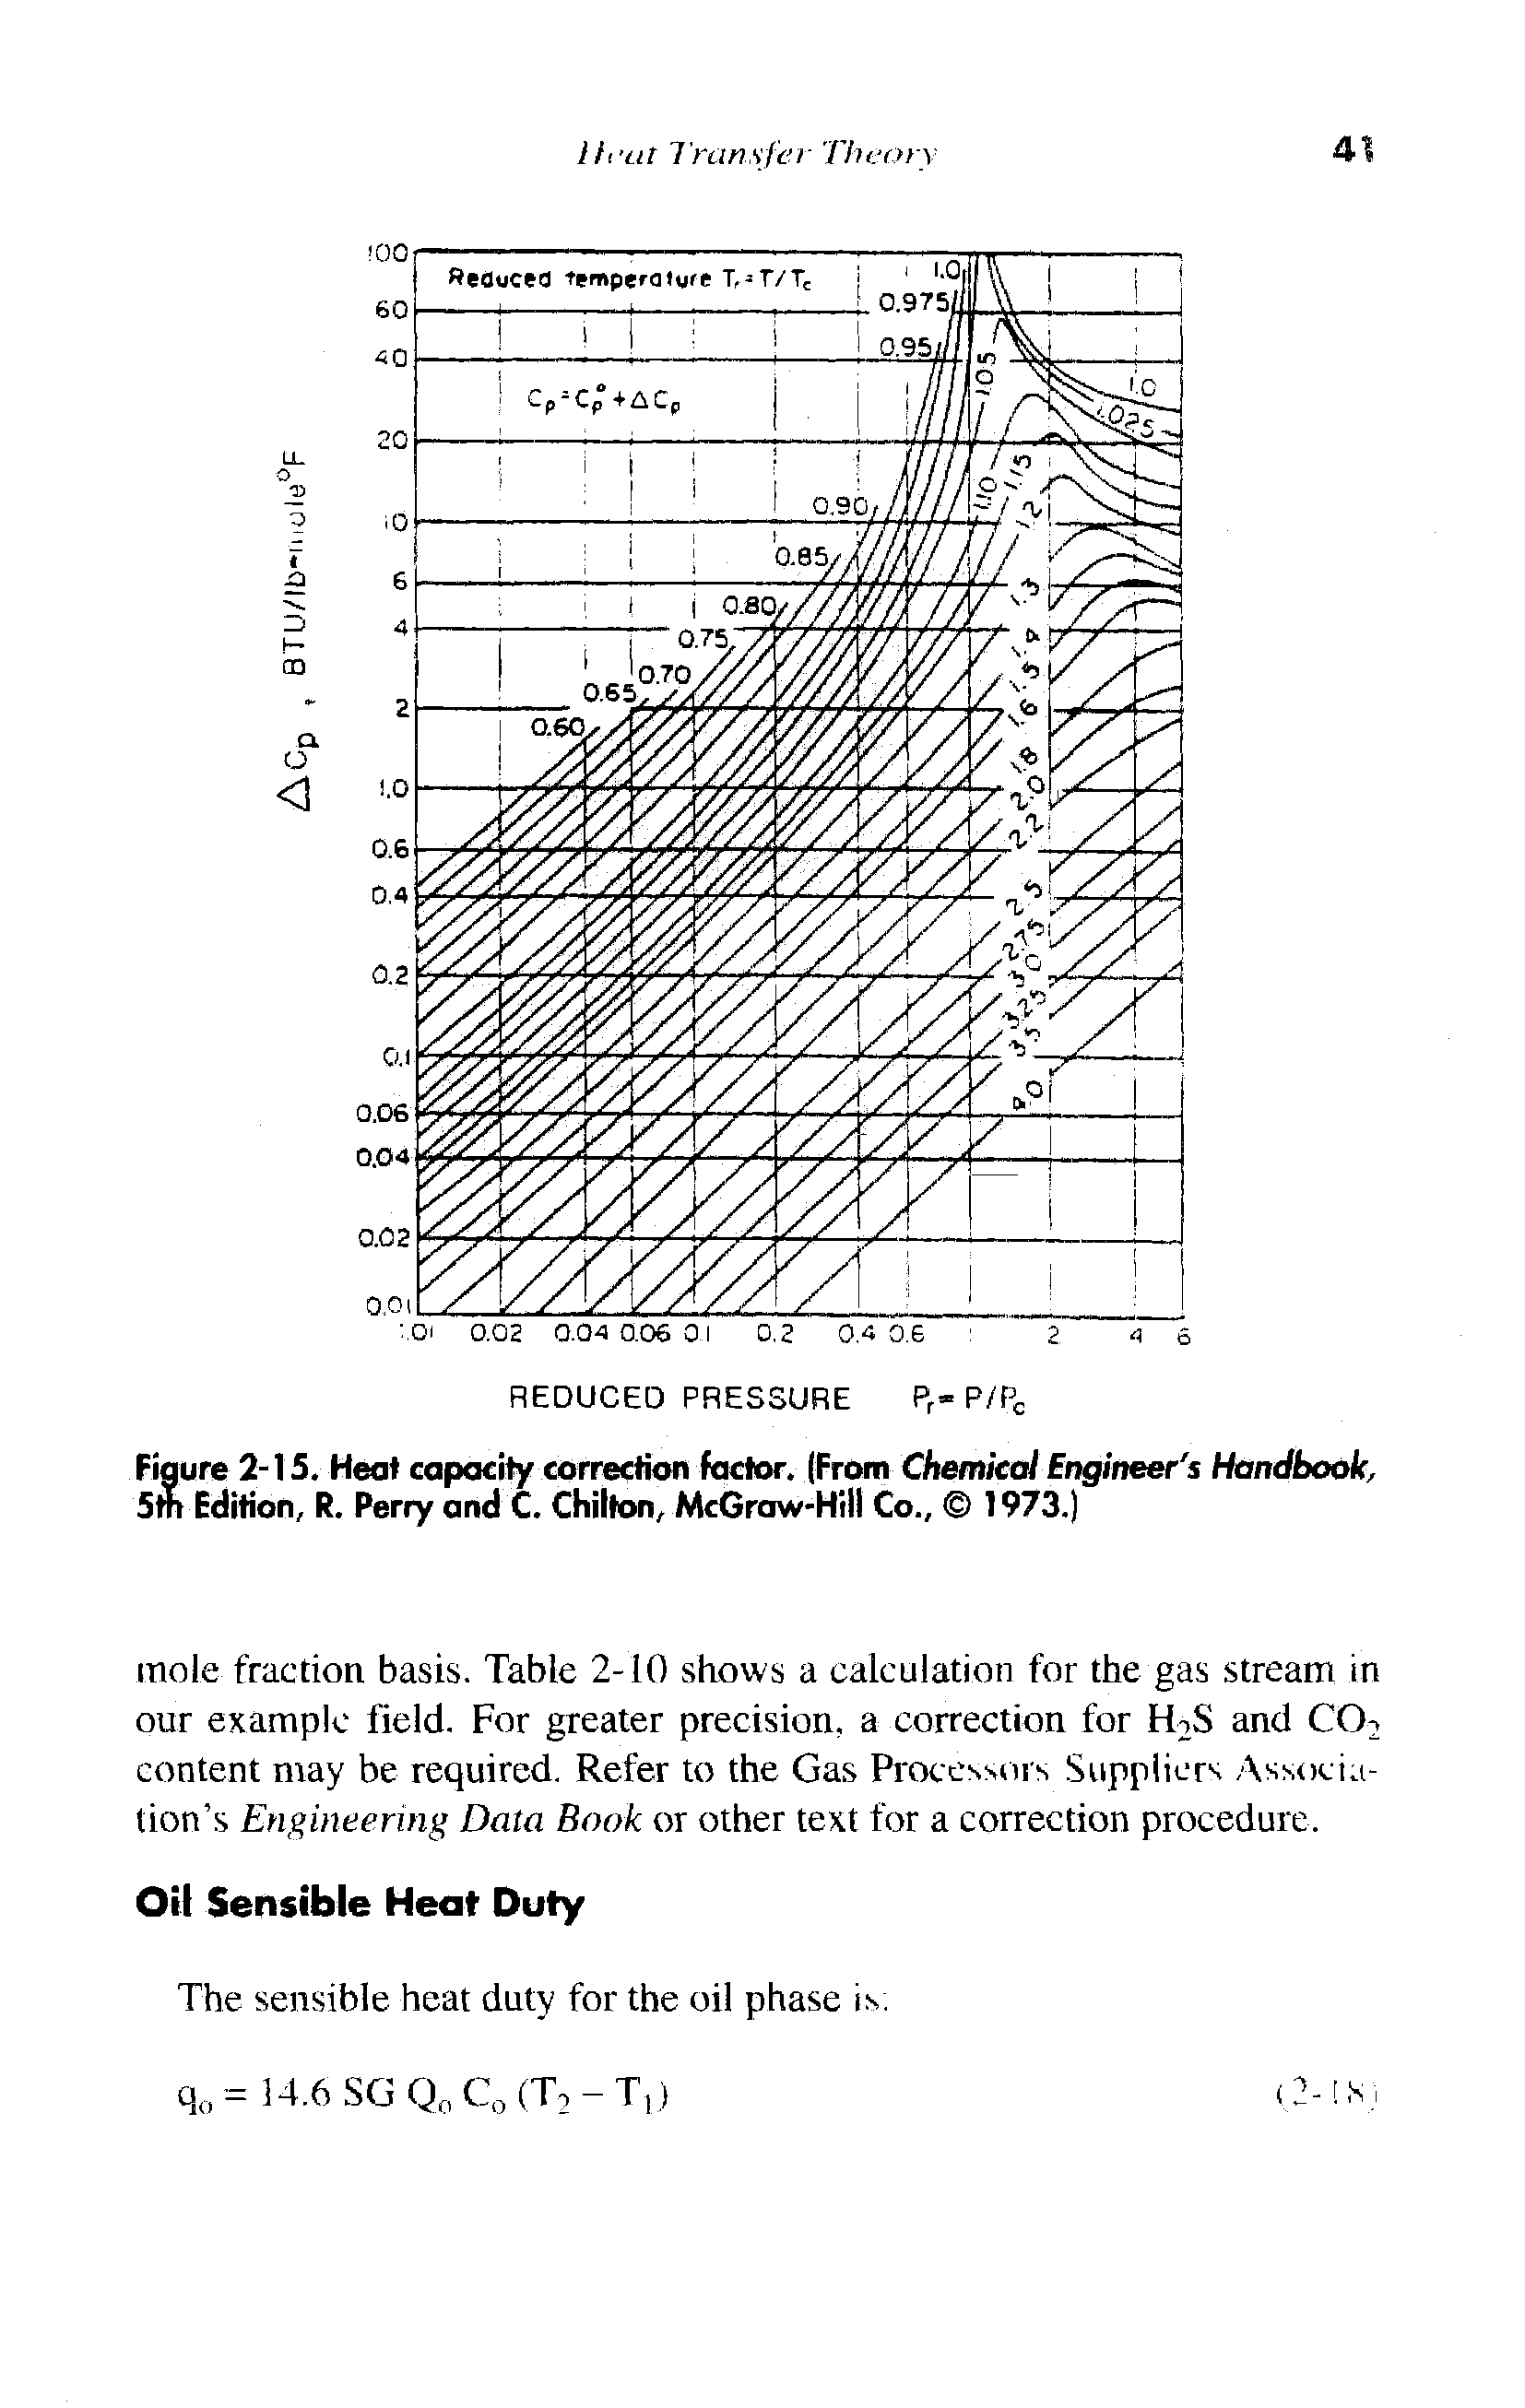 Figure 2-15. Heat capacity correction factor. (From Chemical Engineer s Handbook, 5th Edition, R. Perry and C. Chilton, McGraw-Hill Co., 1973.)...